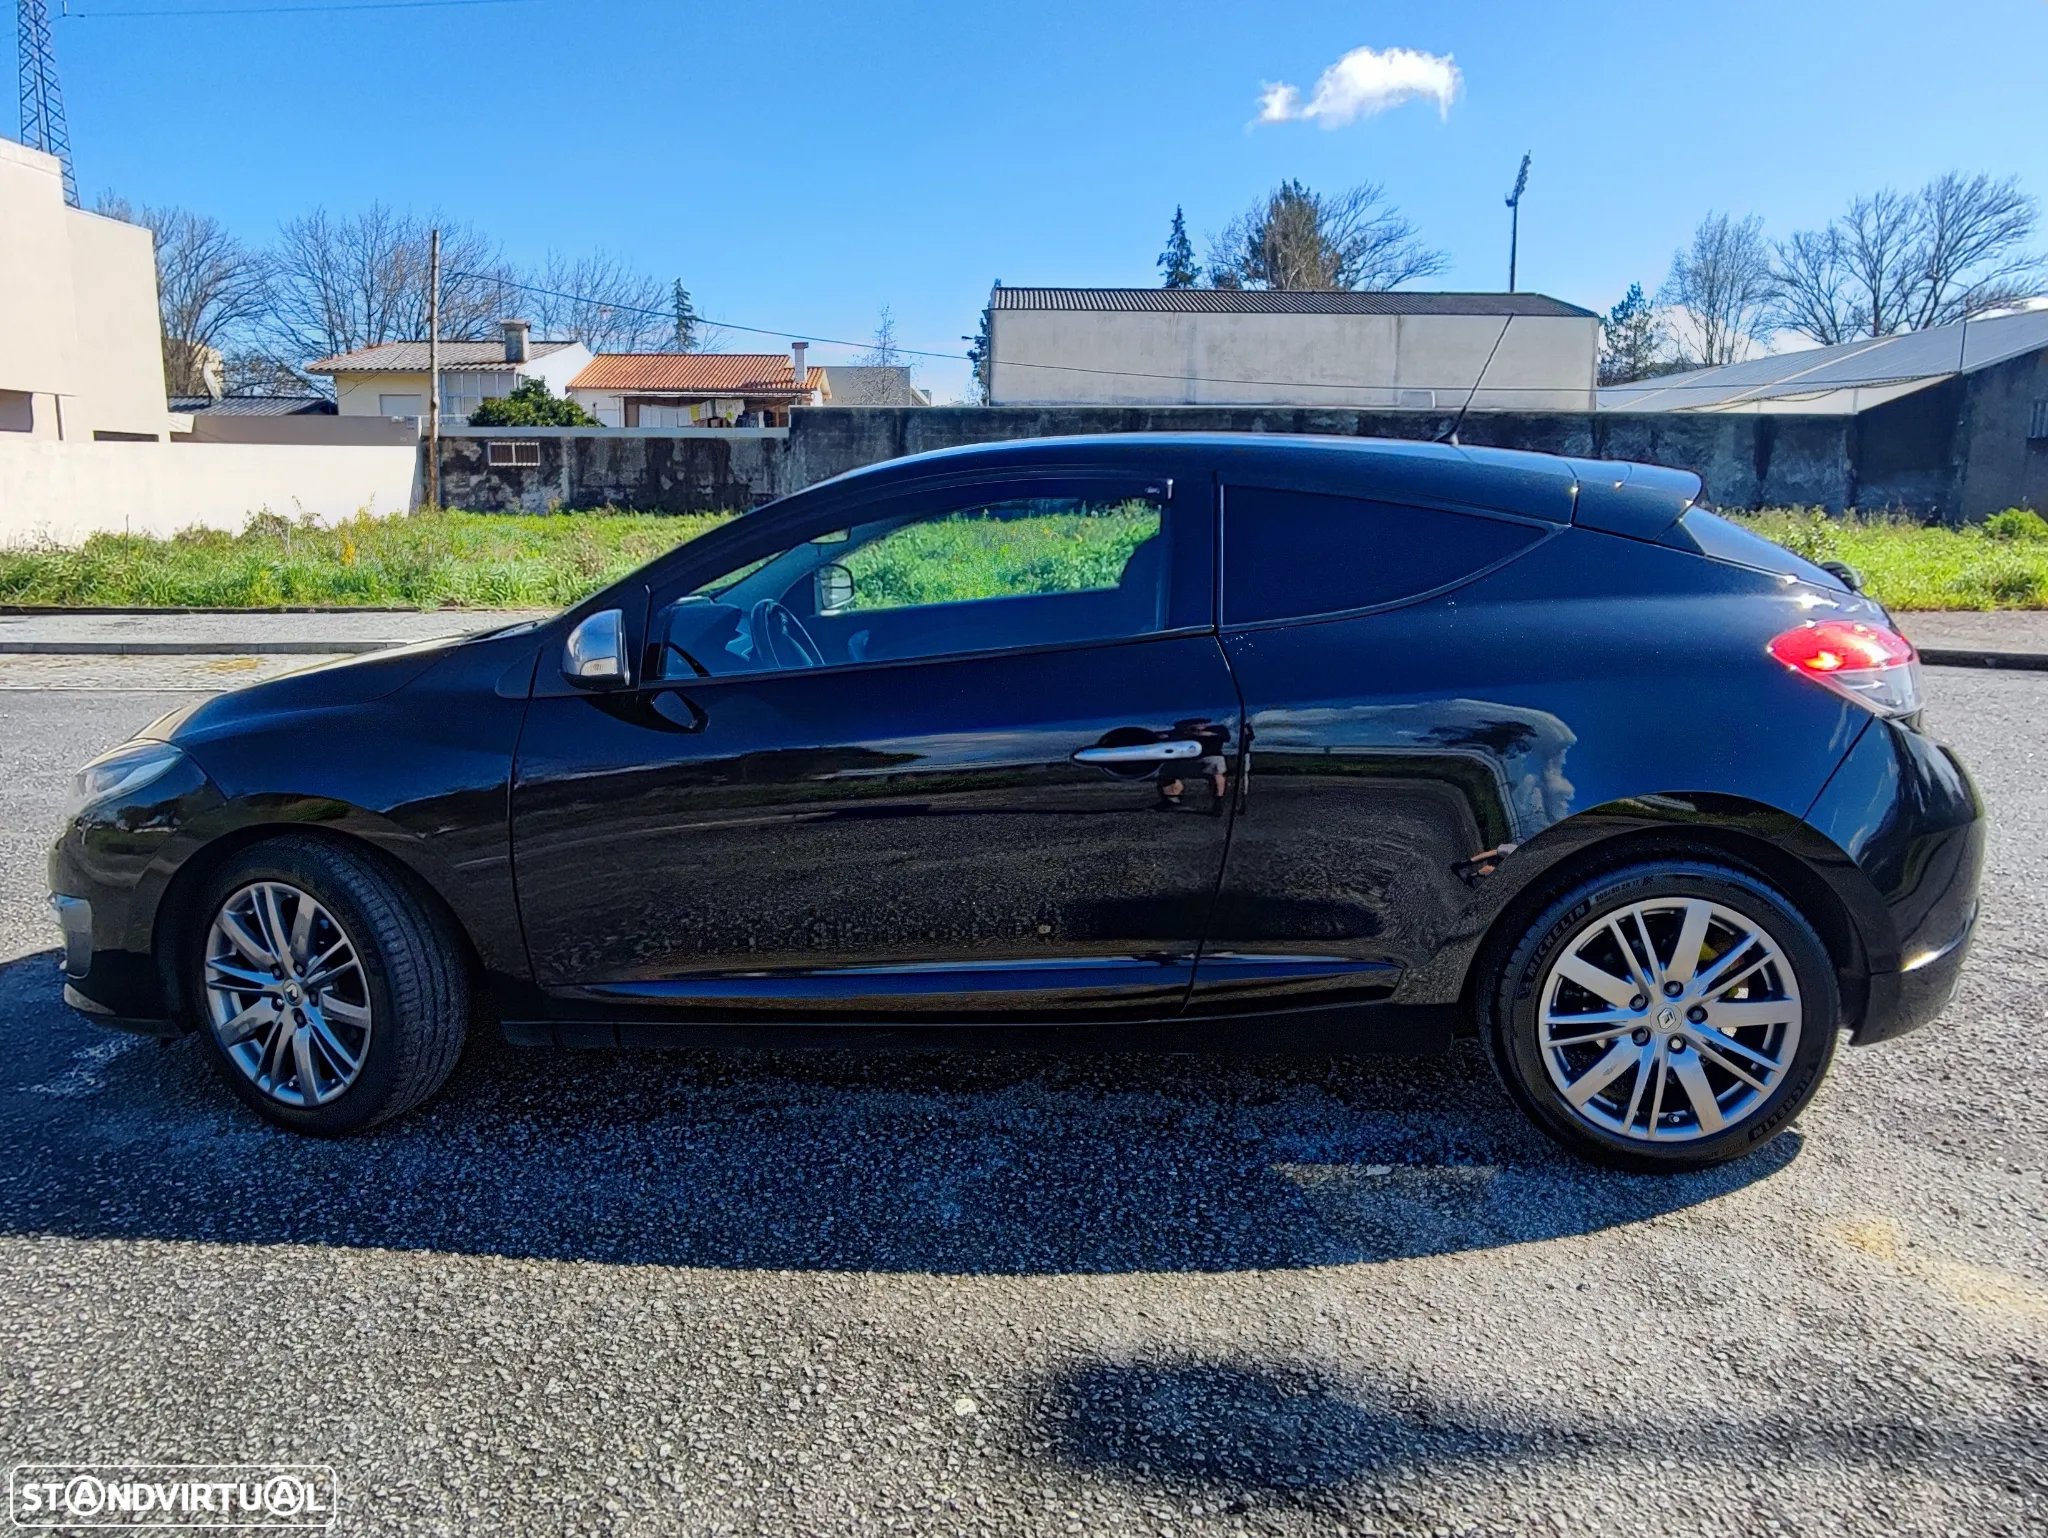 Renault Mégane Coupe 1.6 dCi GT Line SS - 5